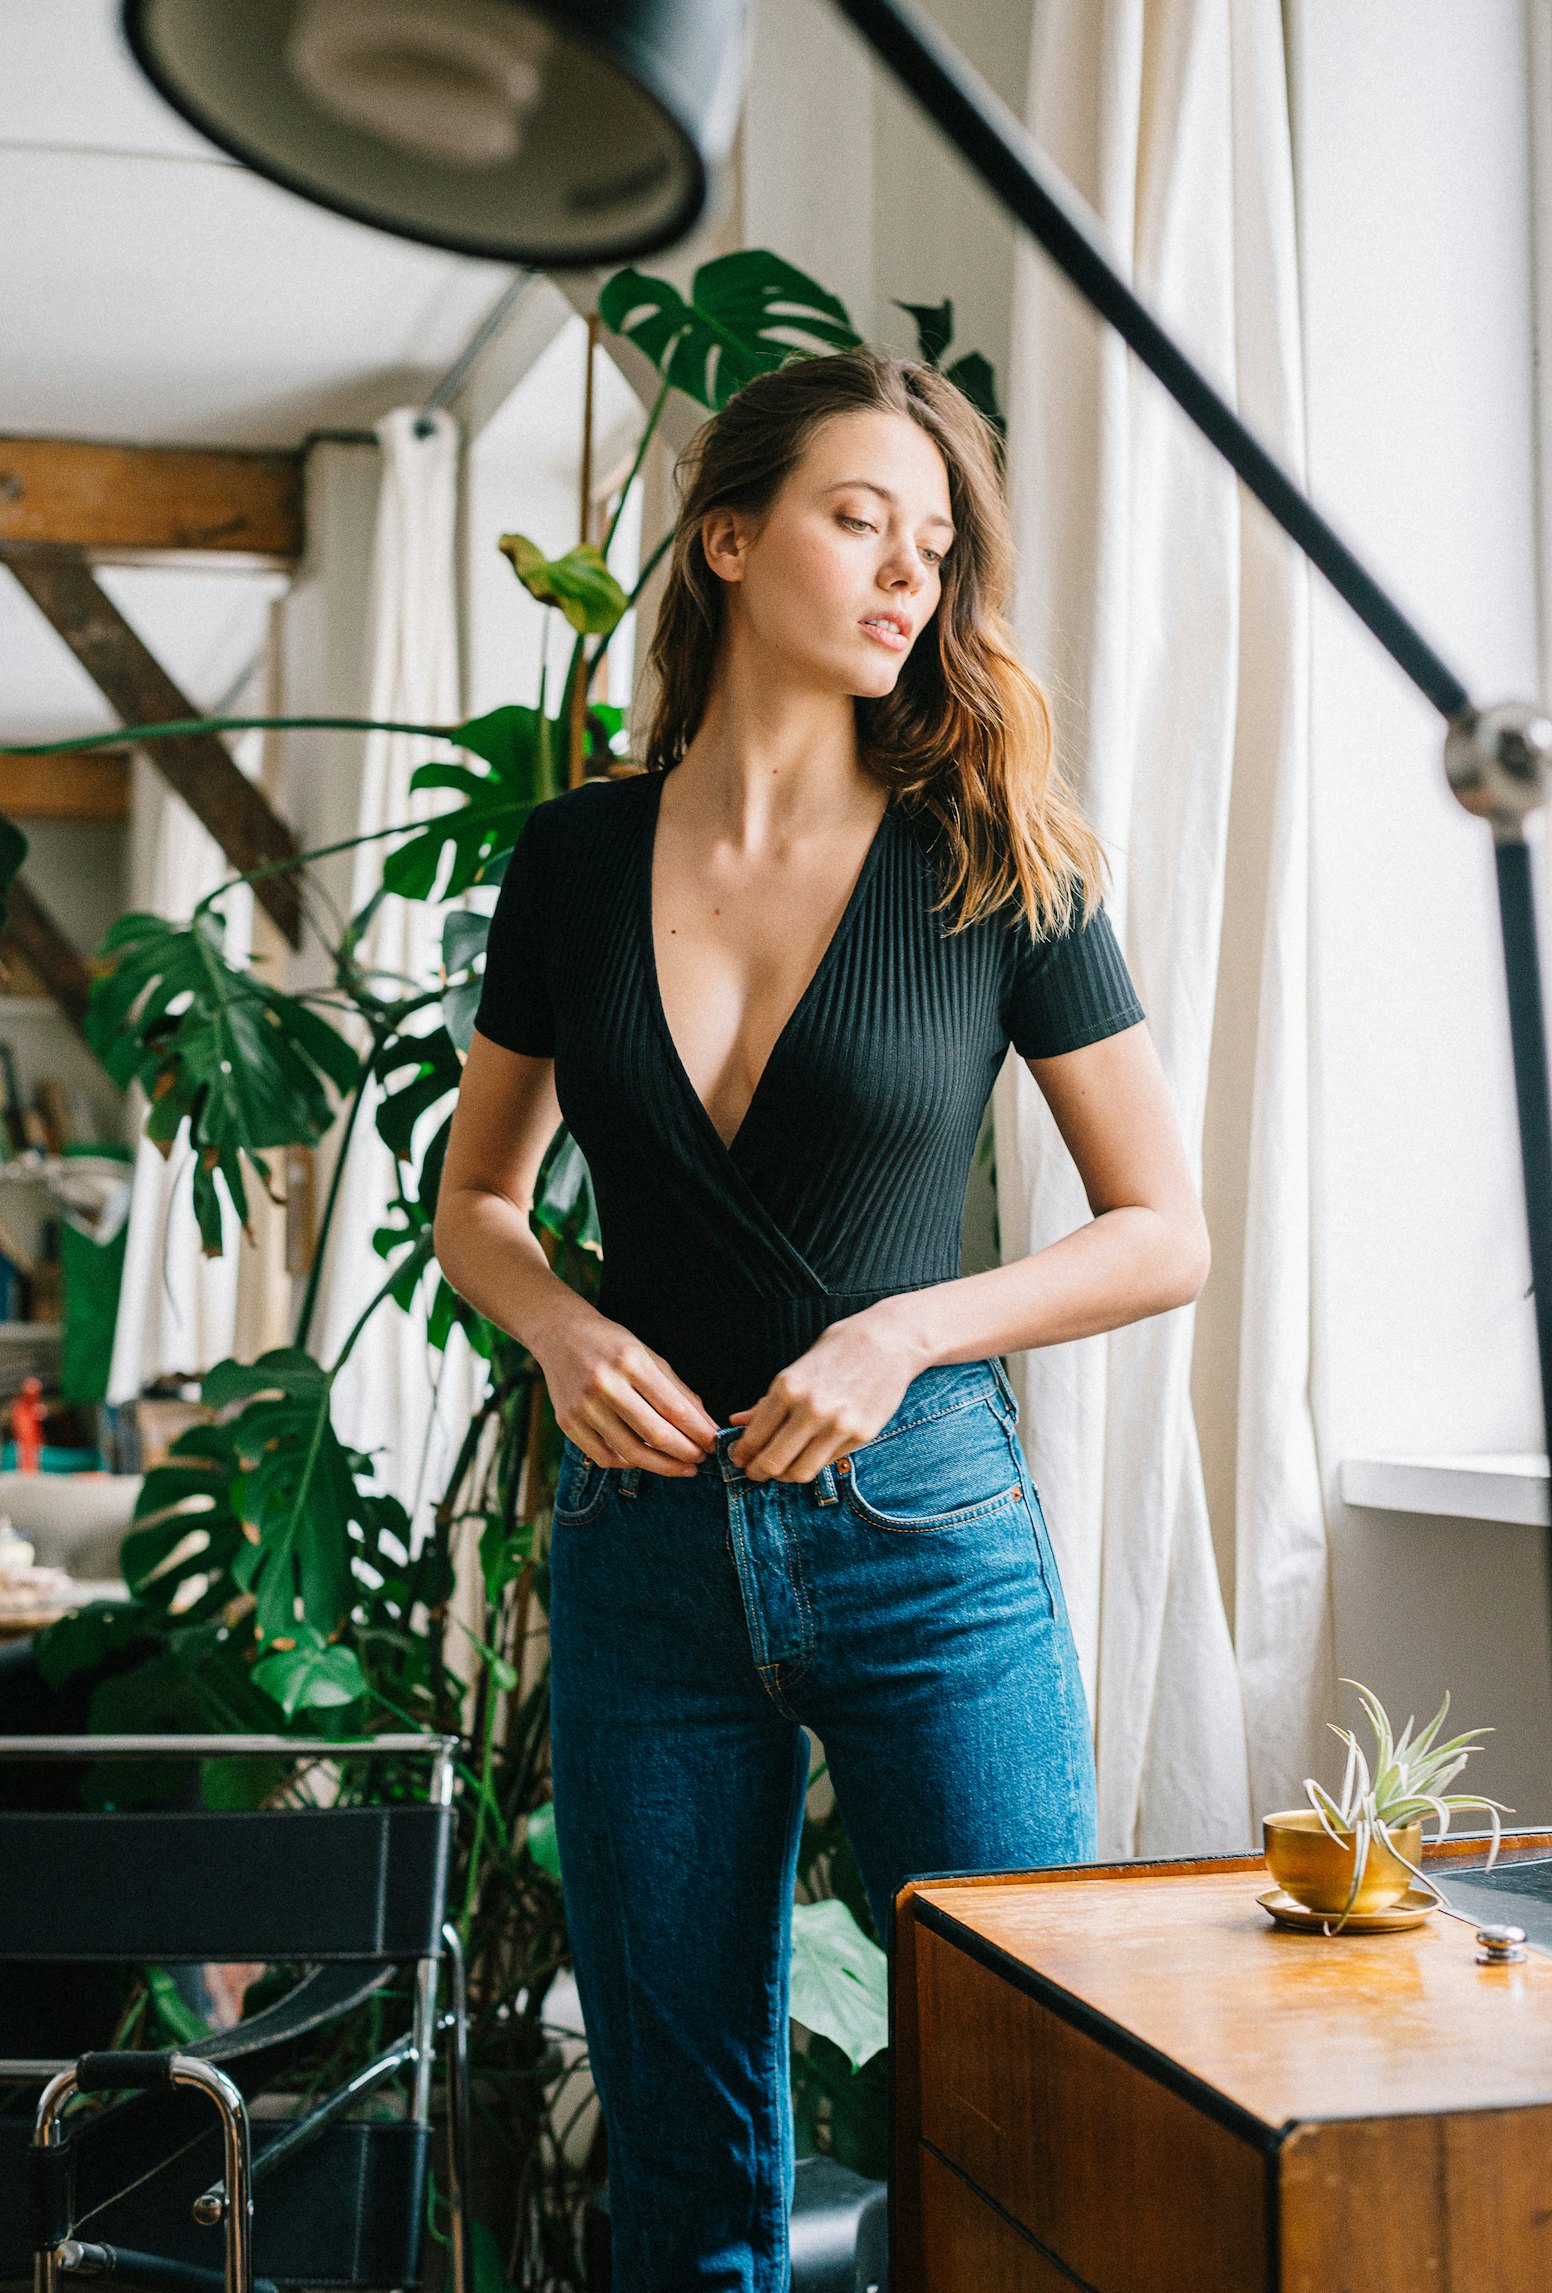 Gaia bodysuit in black worn with a pair of jeans